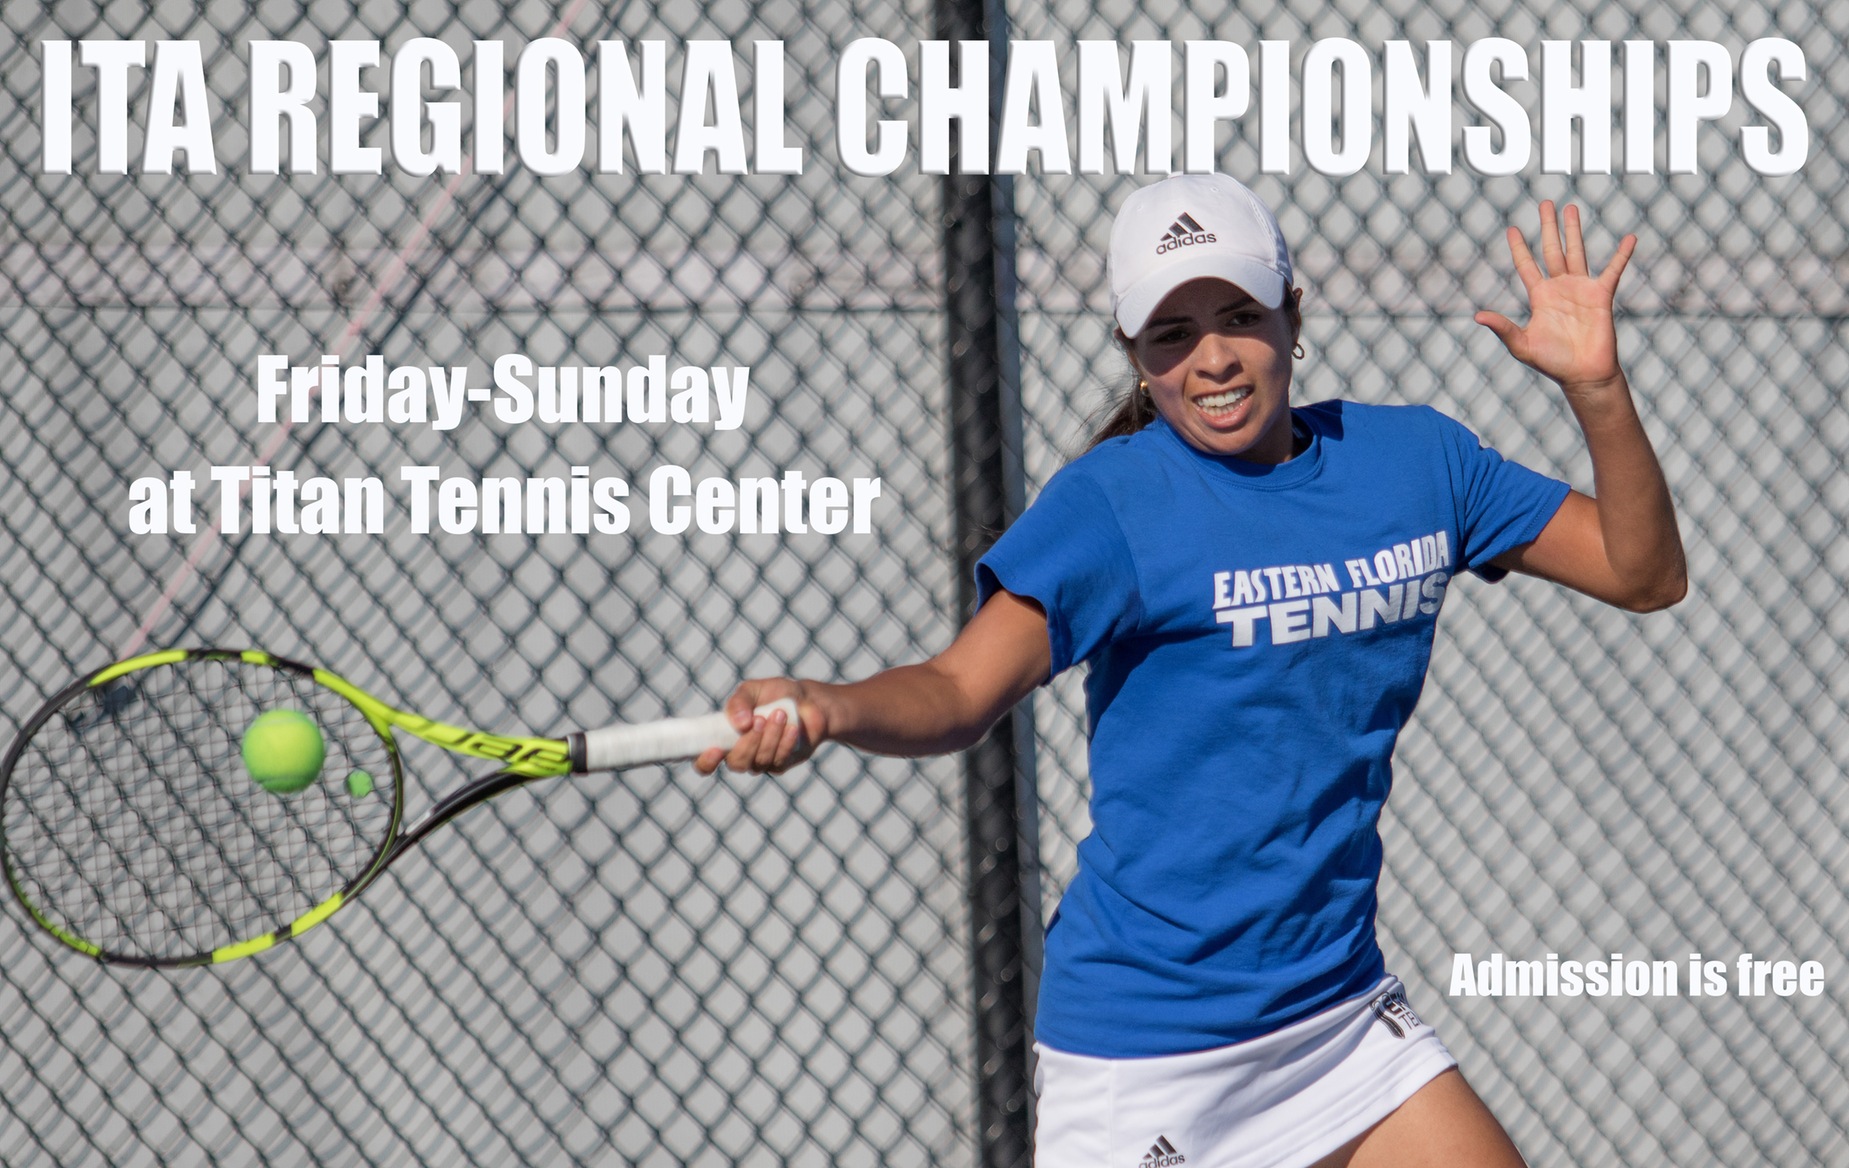 EFSC to host ITA Regional Championships this weekend